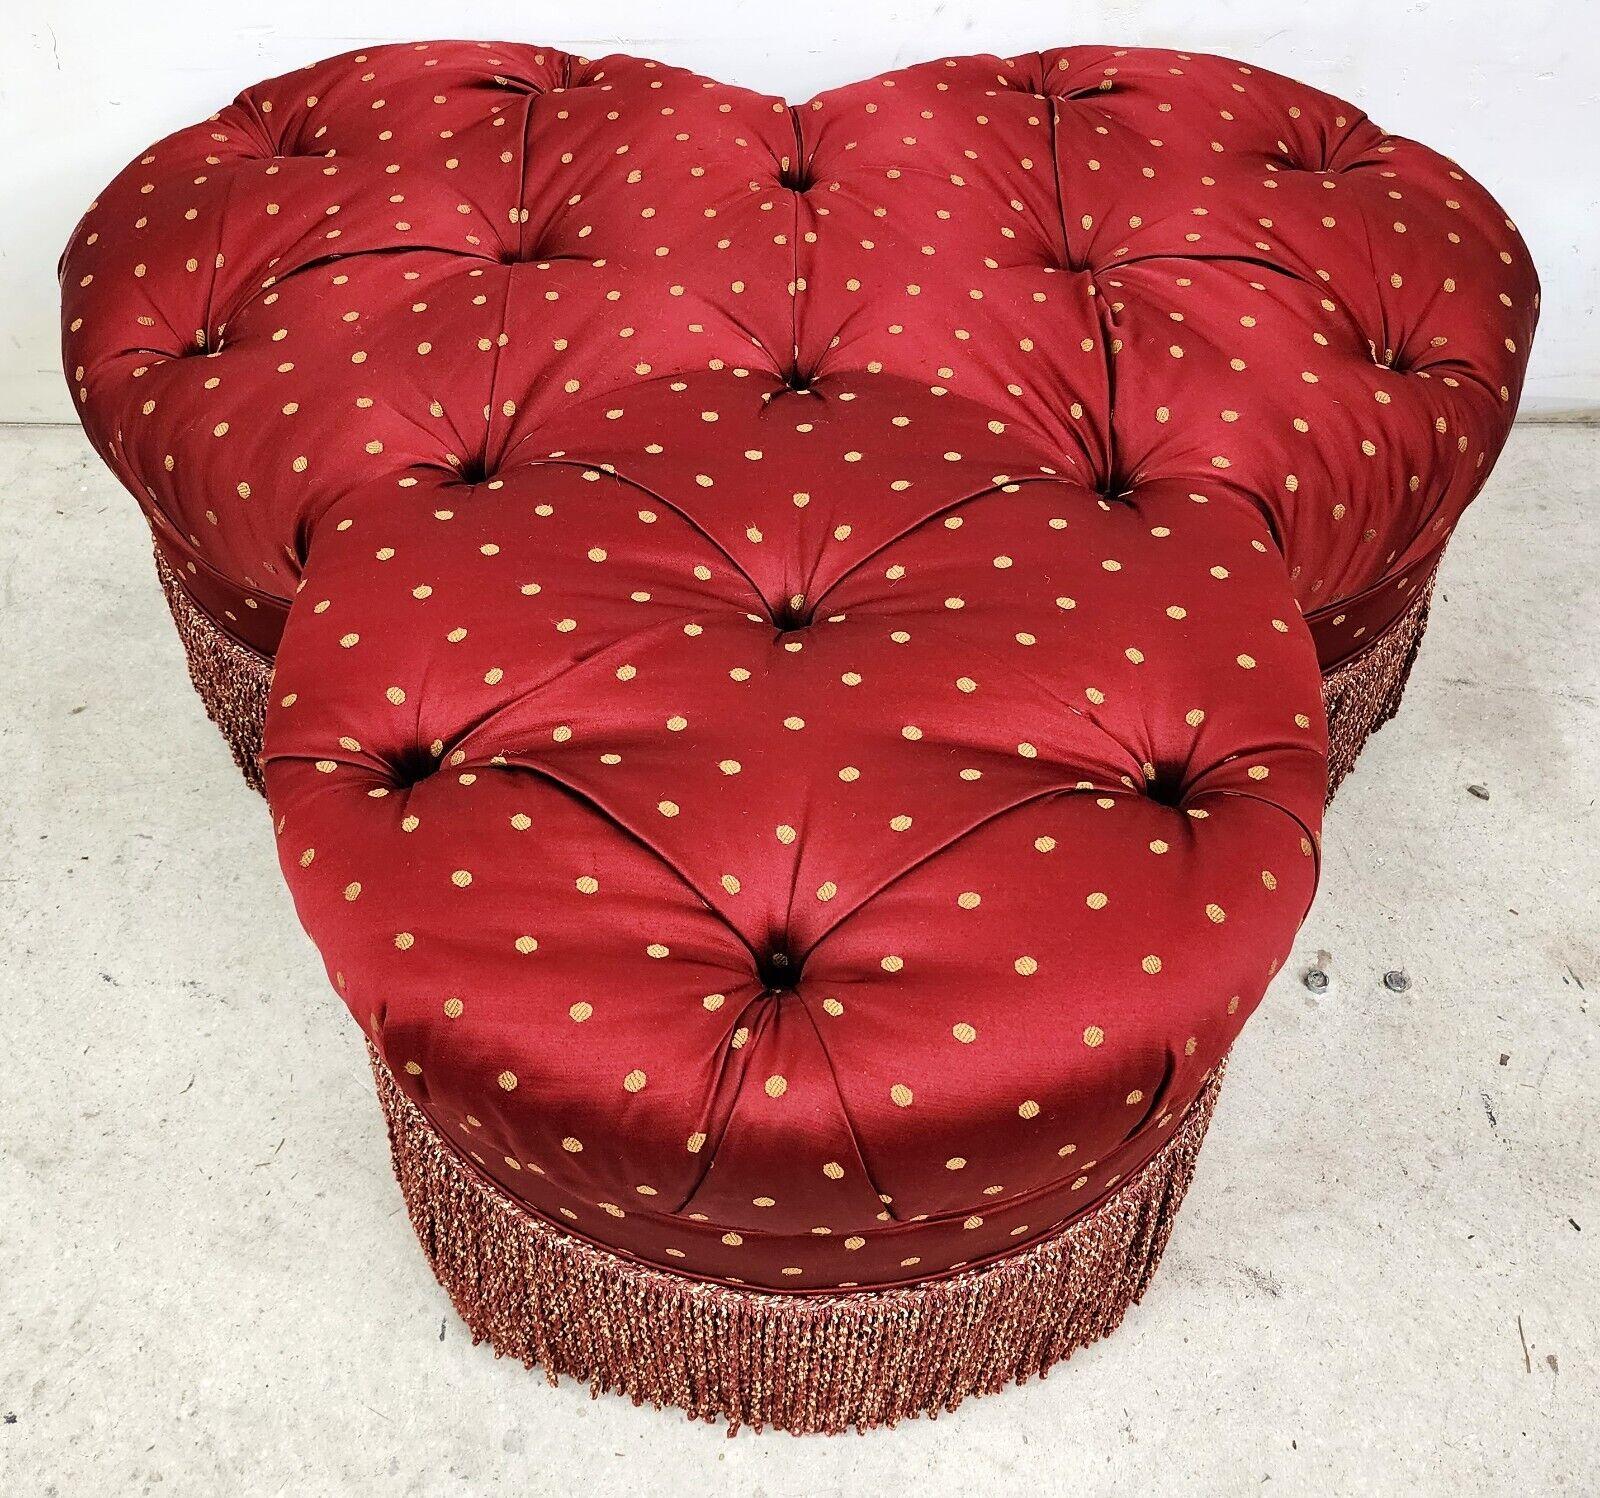 For FULL item description click on CONTINUE READING at the bottom of this page.
For a shipping quote, please send us your zip code.

Offering One Of Our Recent Palm Beach Estate Fine Furniture Acquisitions Of A 
Clover Ottoman Pouf Tufted